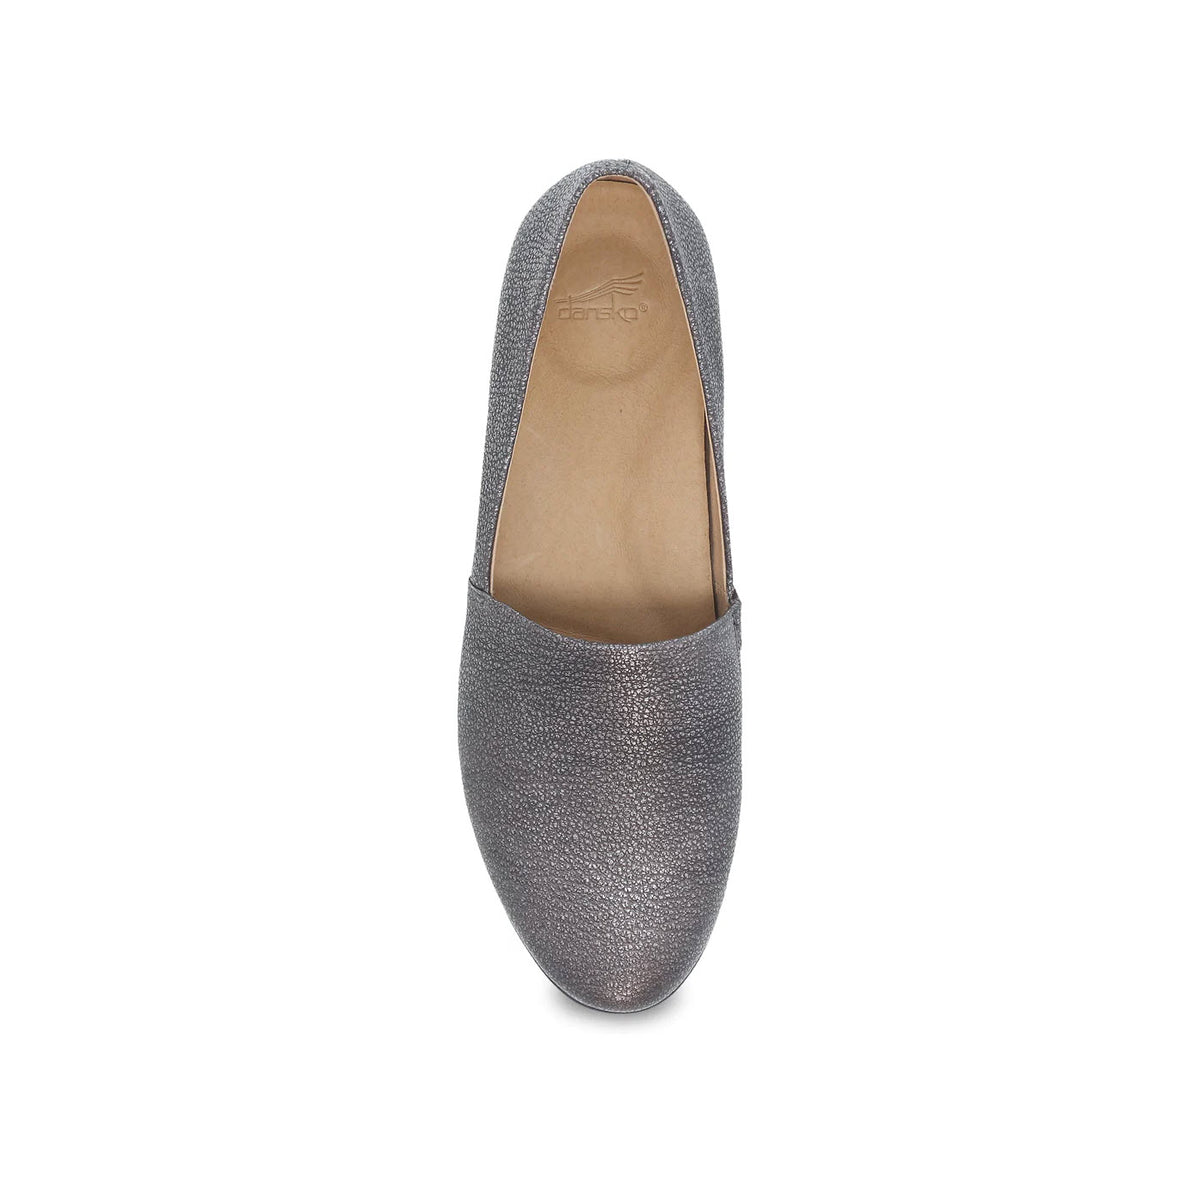 A top view of a single Dansko Larisa Pewter Metallic flat shoe with leather uppers on a white background.